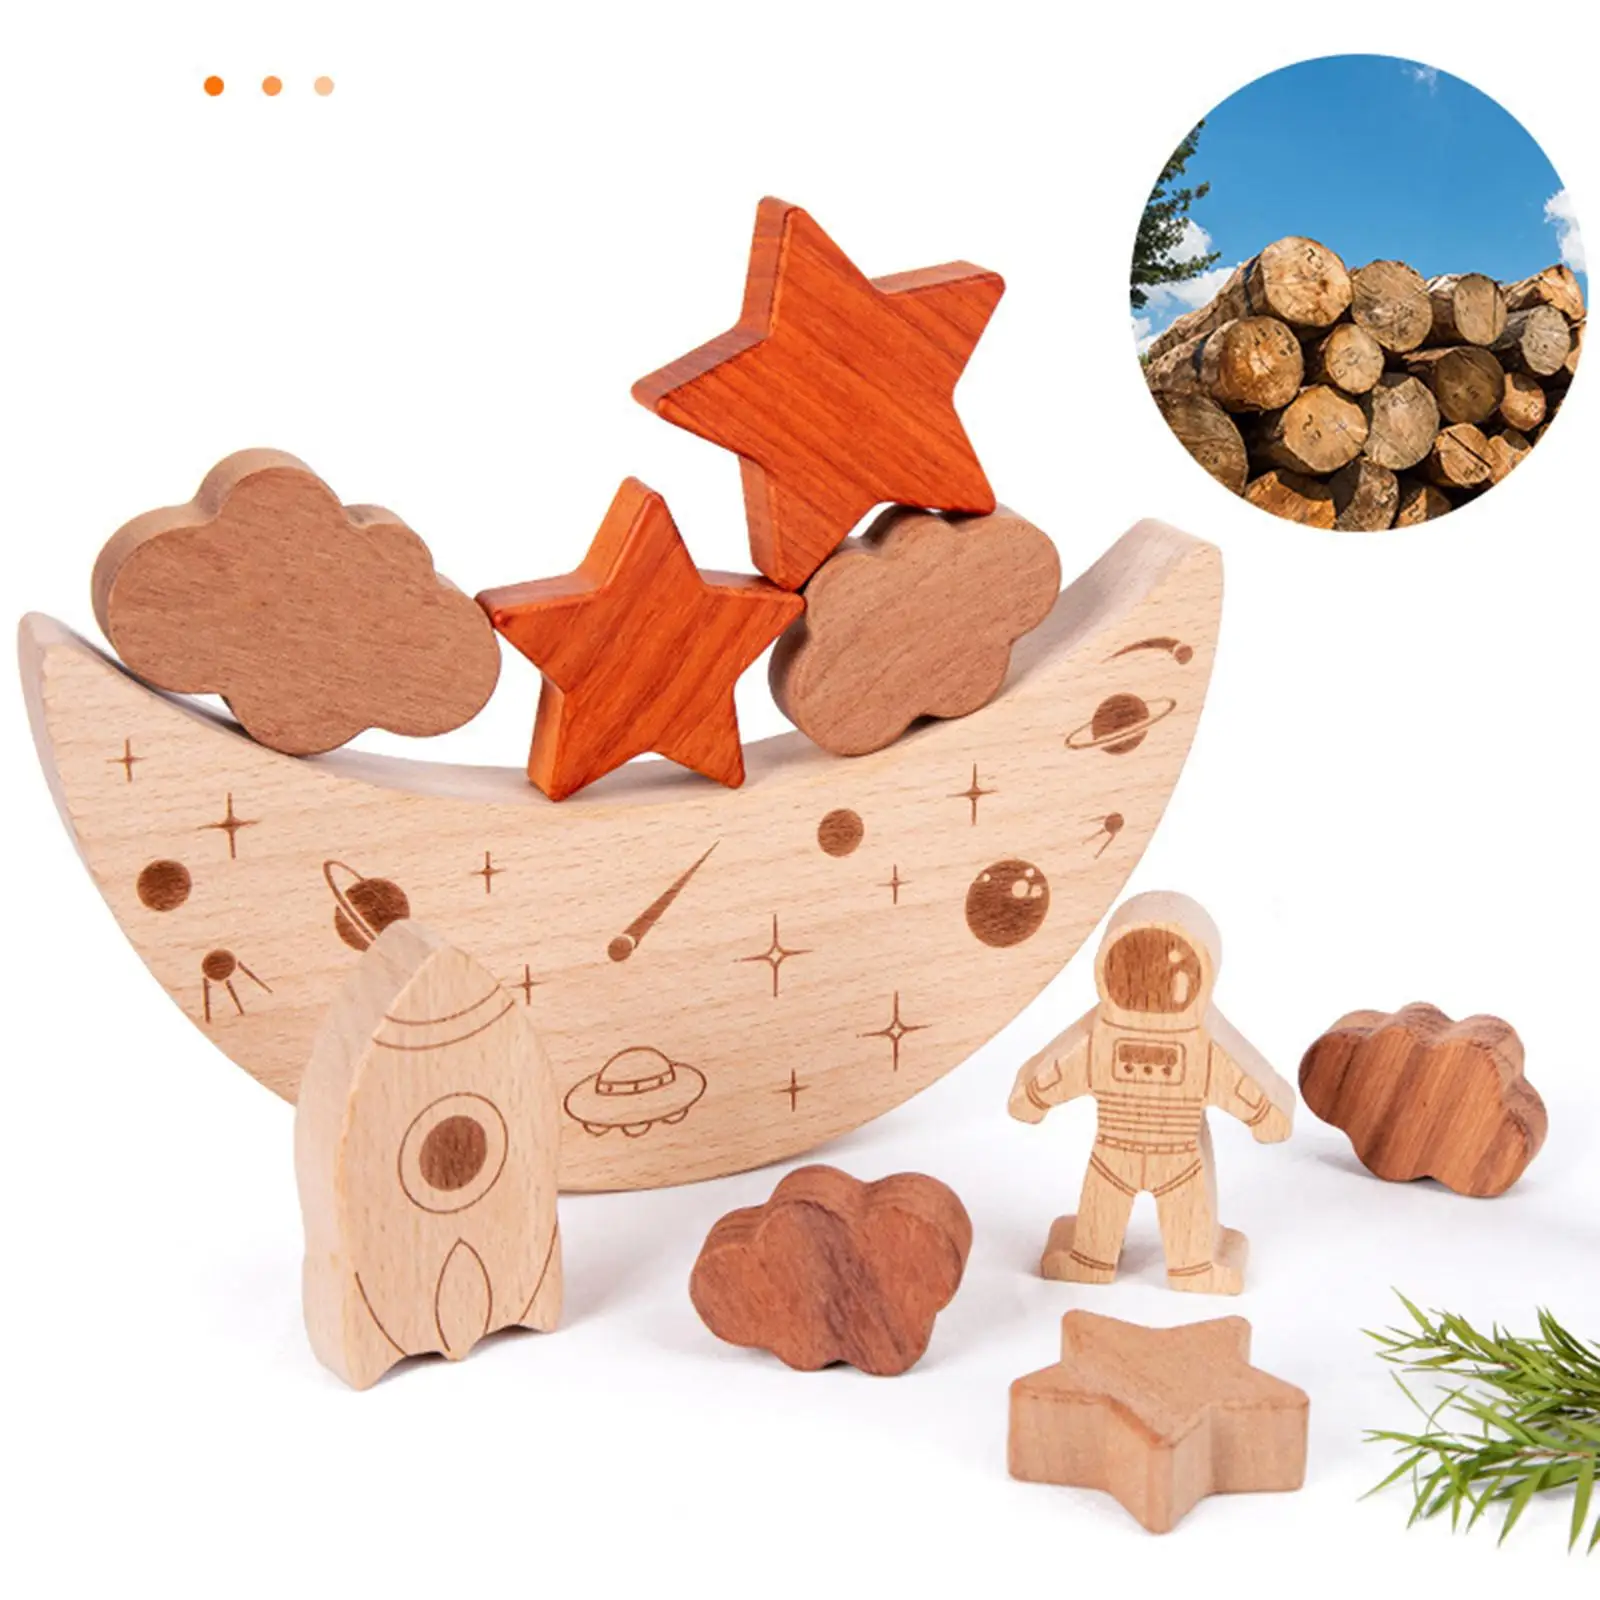 11 Pieces Wooden Blocks Balance Game Montessori Toys for Baby Kids Toddlers Birthday Gifts